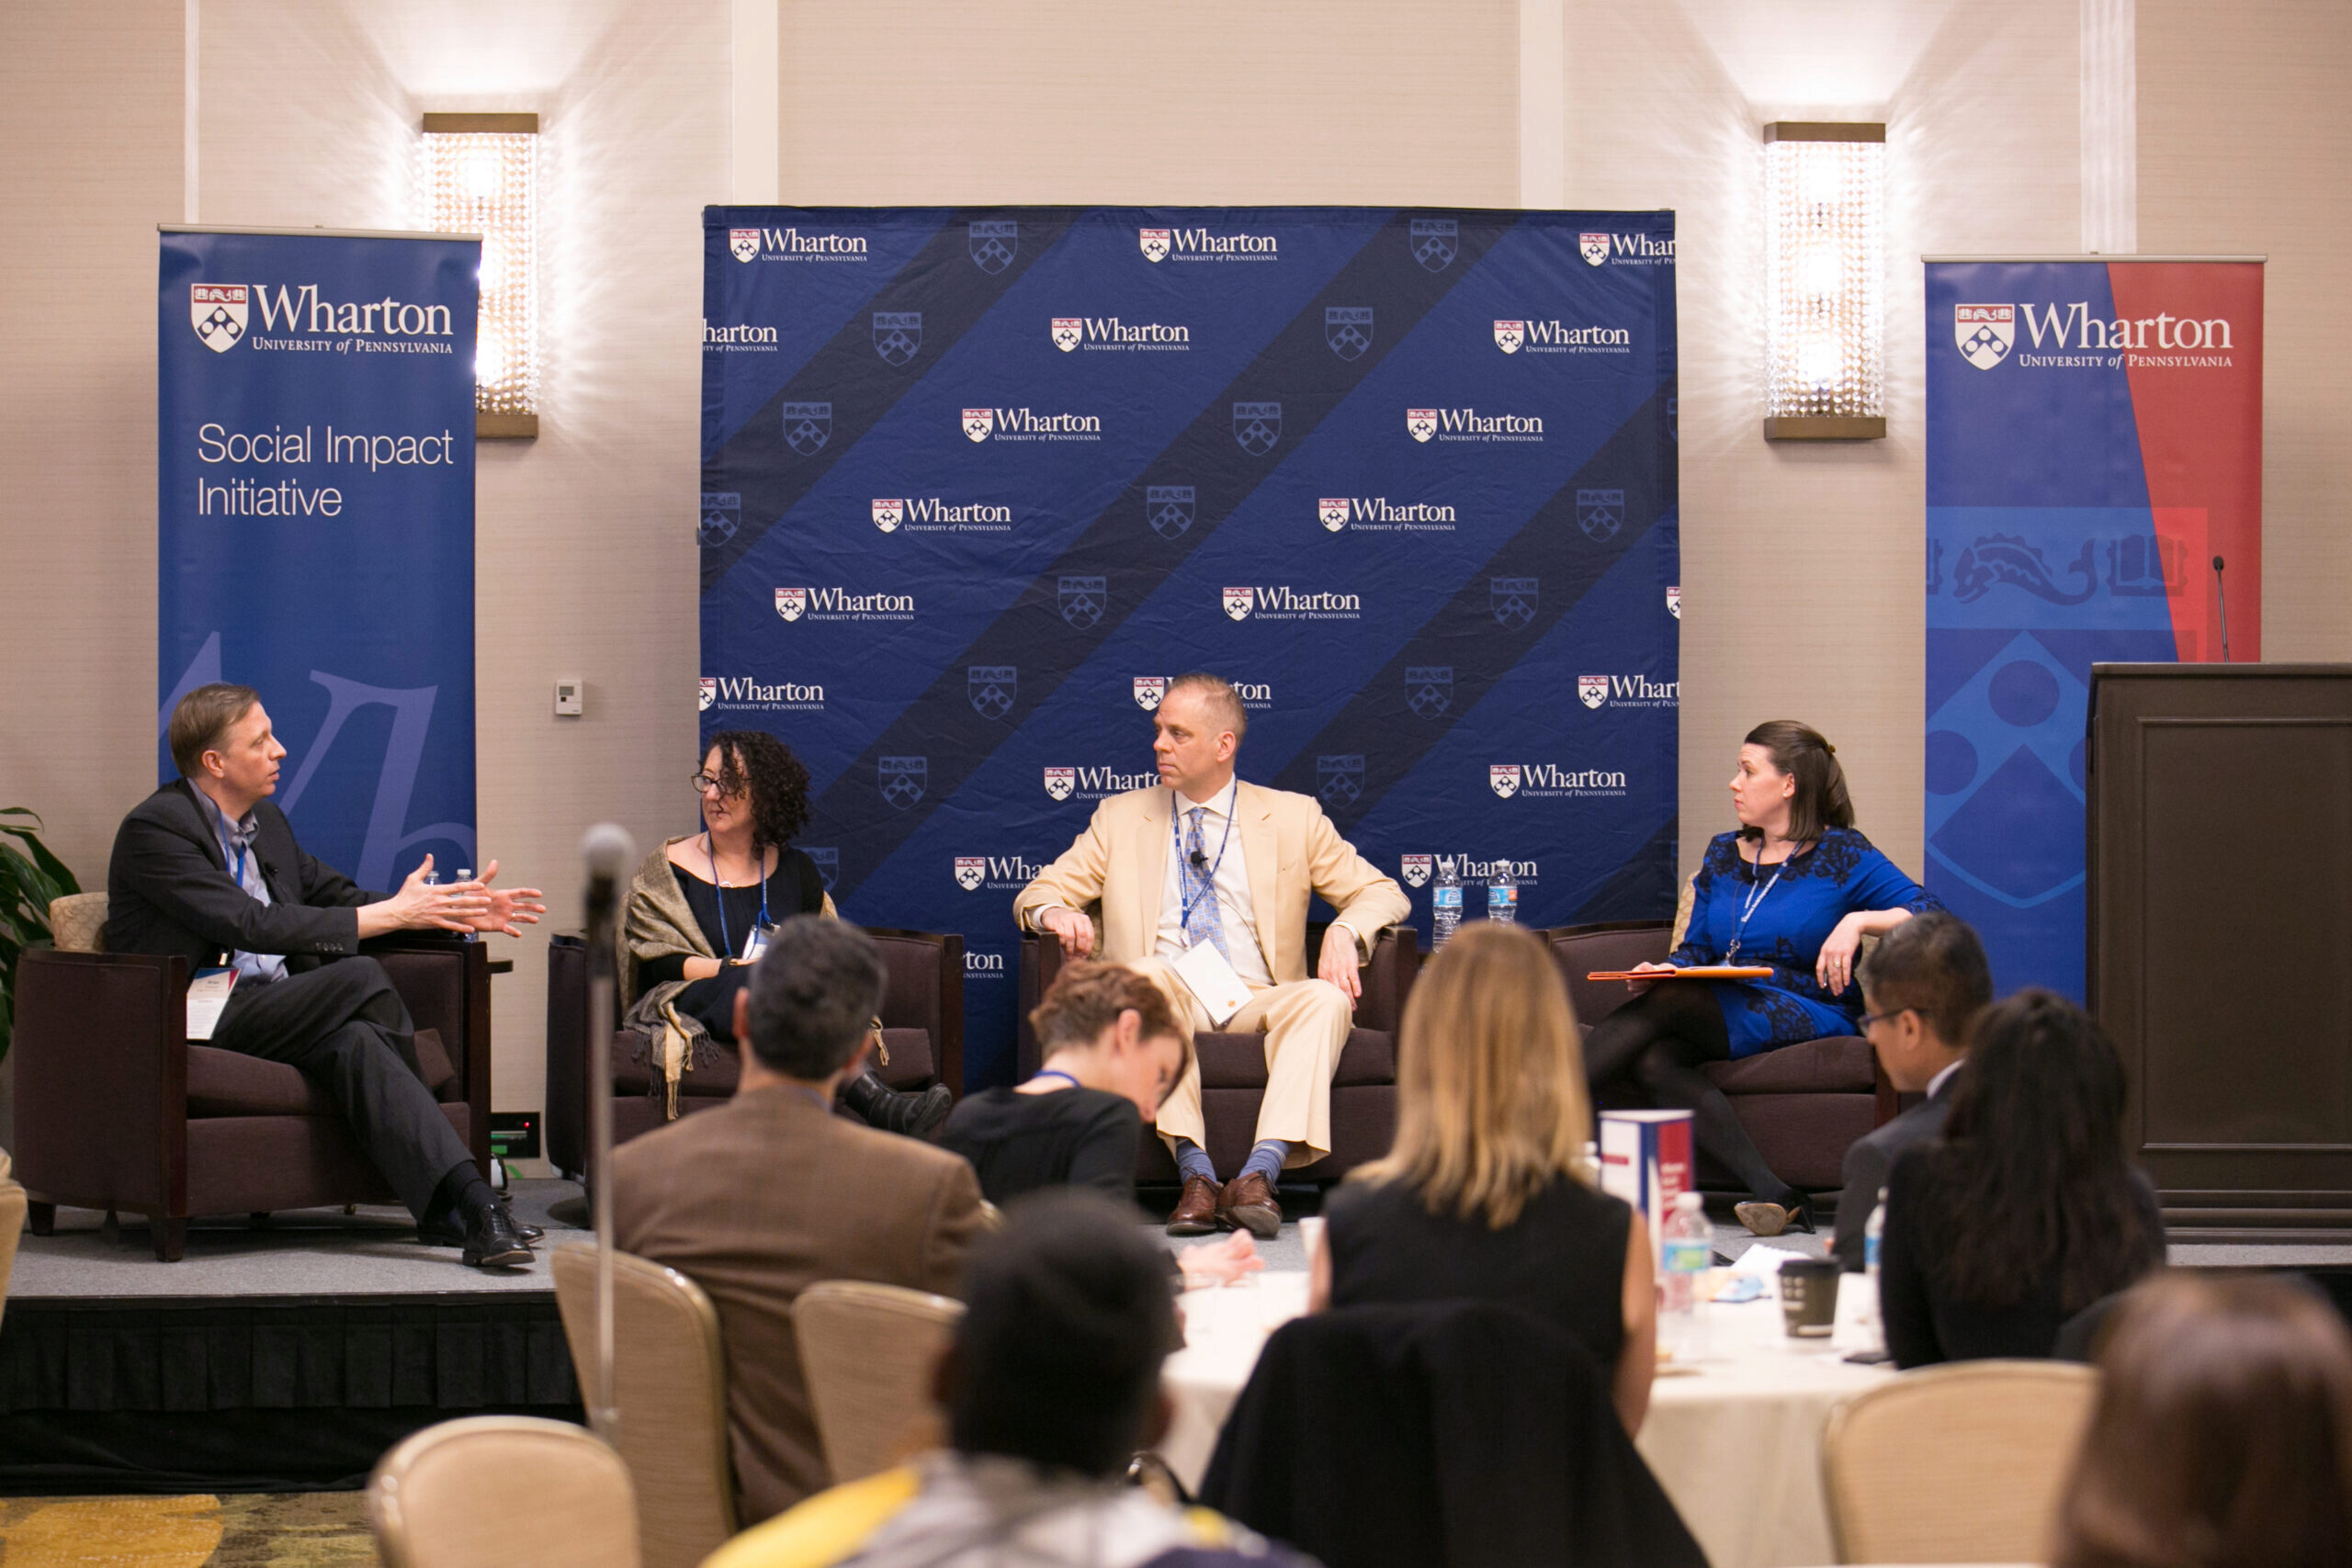 Image from 2017 Social Impact Initiative event with Suzanne Biegel, Sandra M. Hunt, and others on stage speaking before a room of professionals.